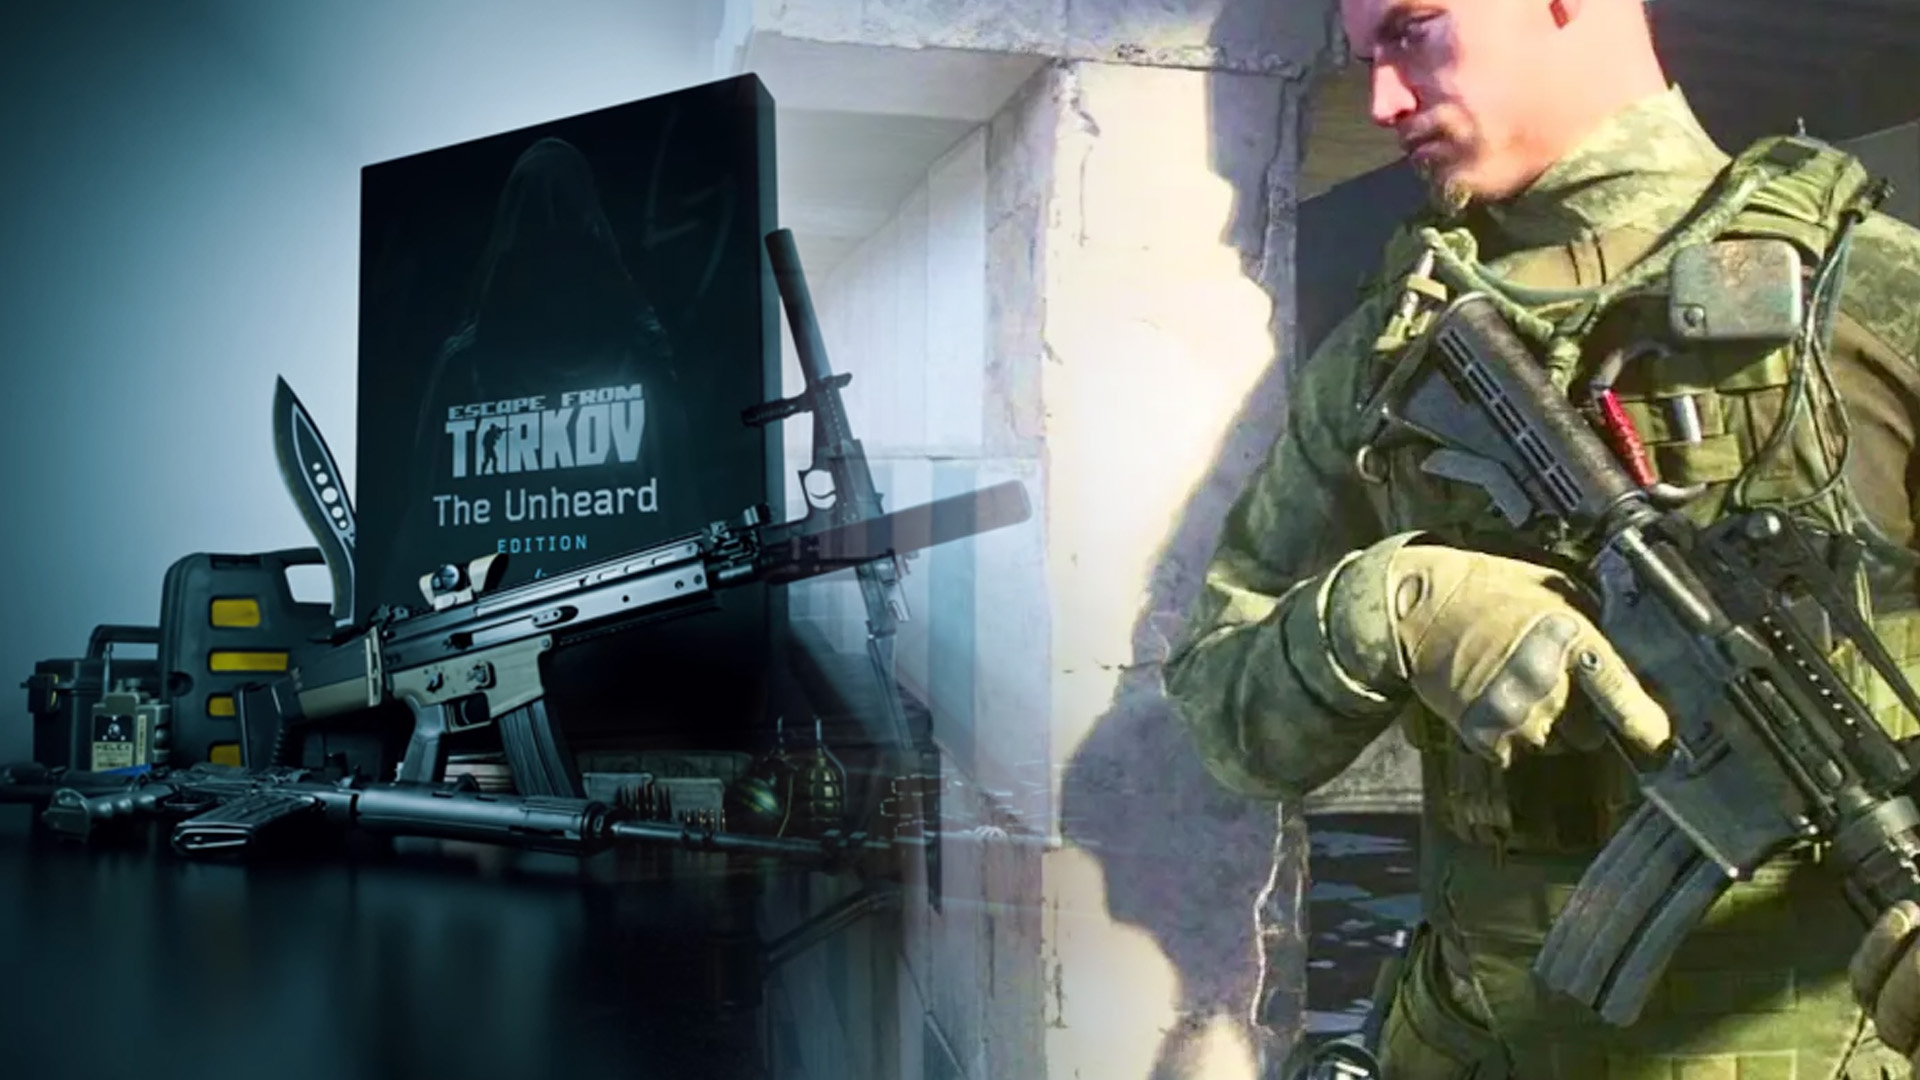 Escape from Tarkov's The Unheard Edition caught in pay-to-win scandal